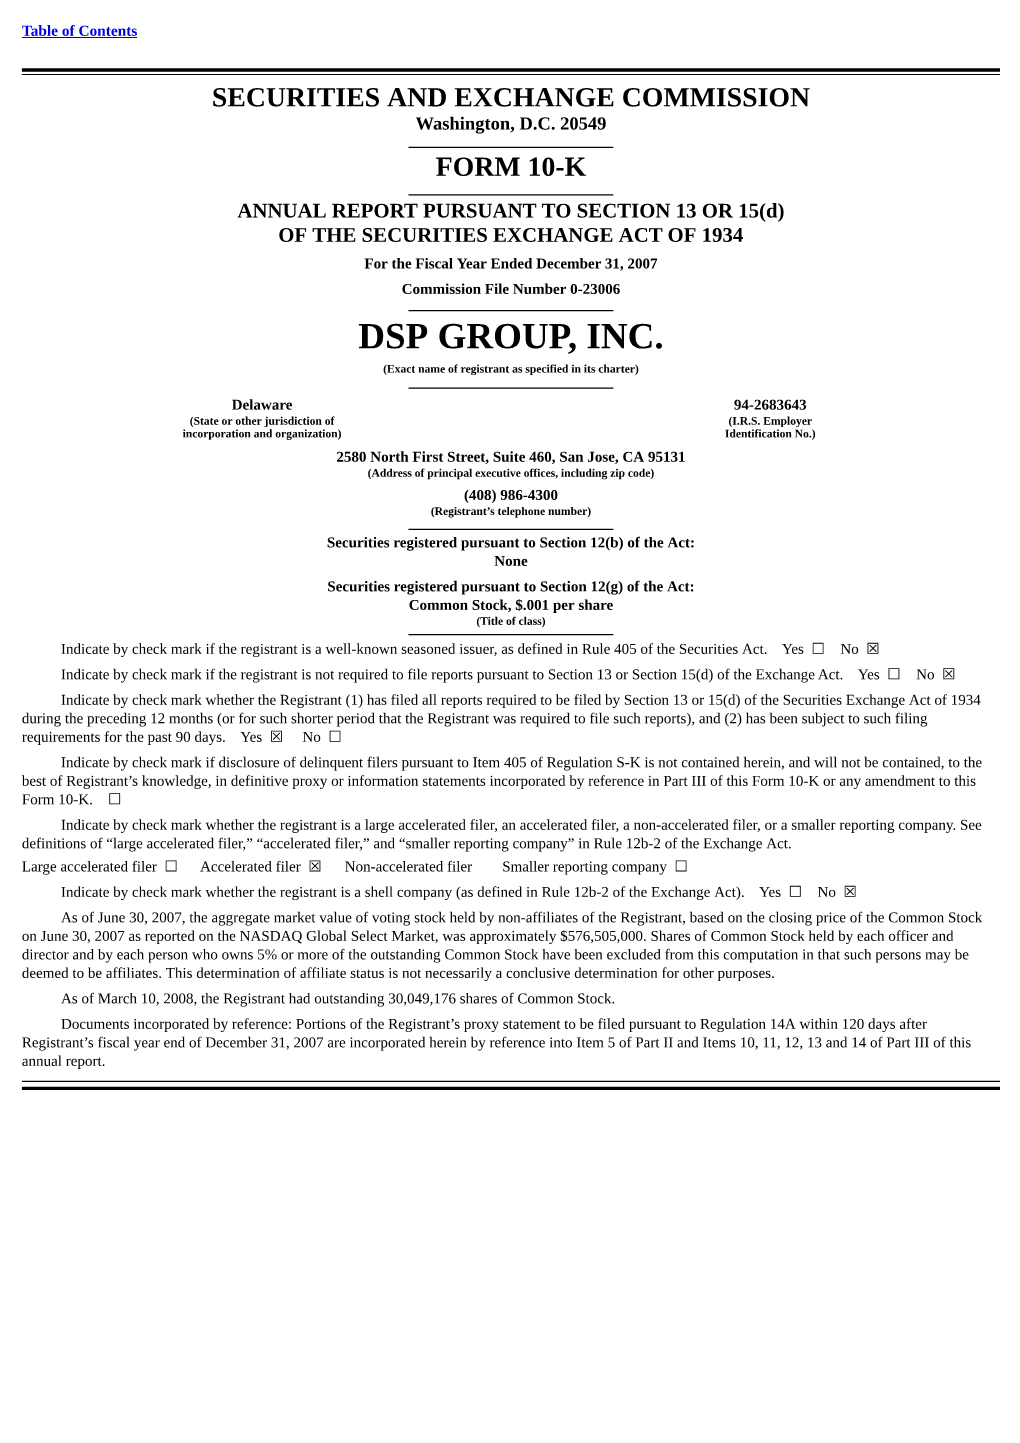 DSP GROUP, INC. (Exact Name of Registrant As Specified in Its Charter)